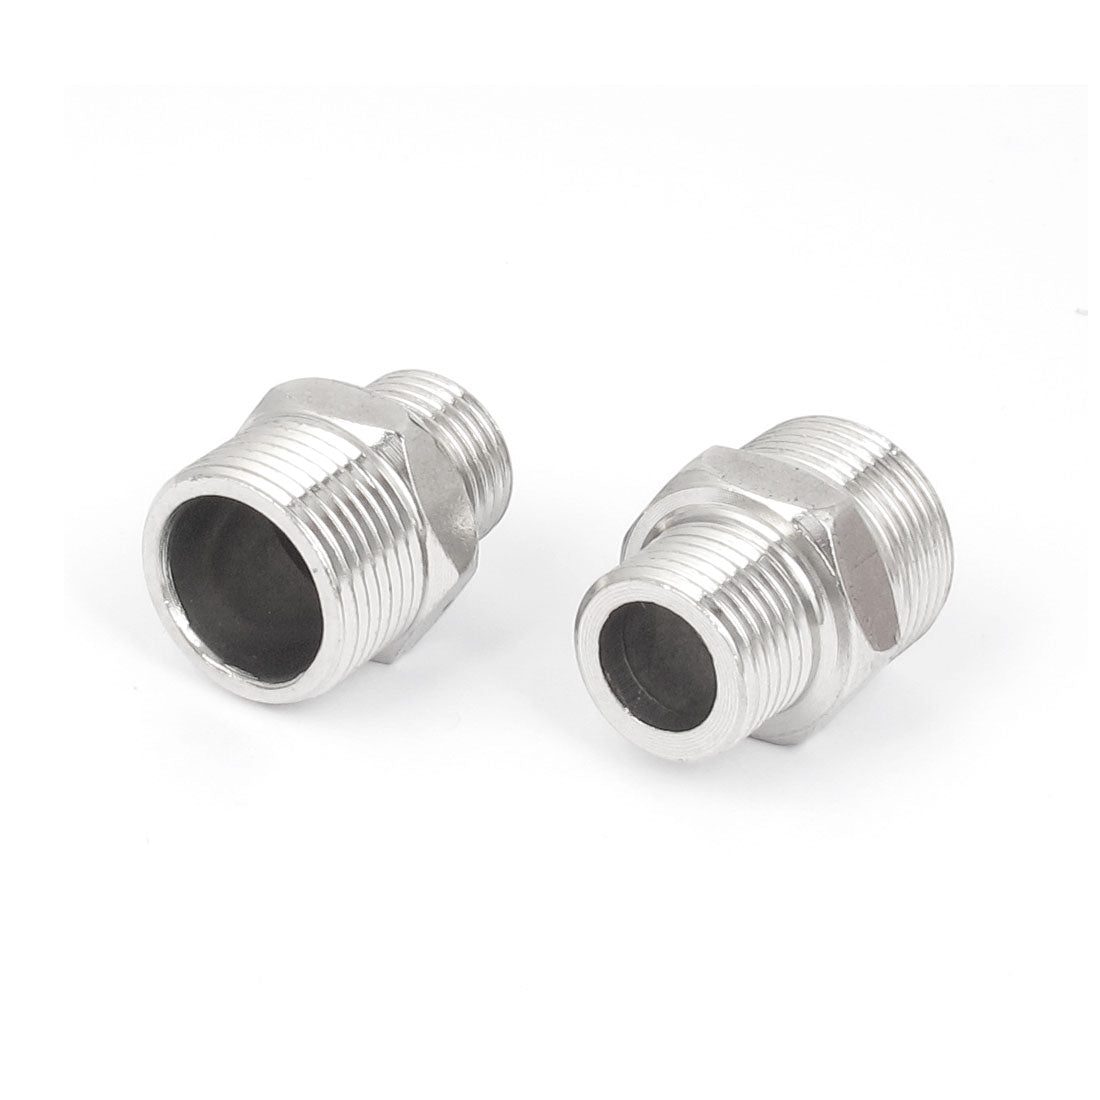 Uxcell Uxcell 3/8BSP to 1/4BSP Male Thread 304 Stainless Steel Hex Nipple Pipe Fitting 2pcs